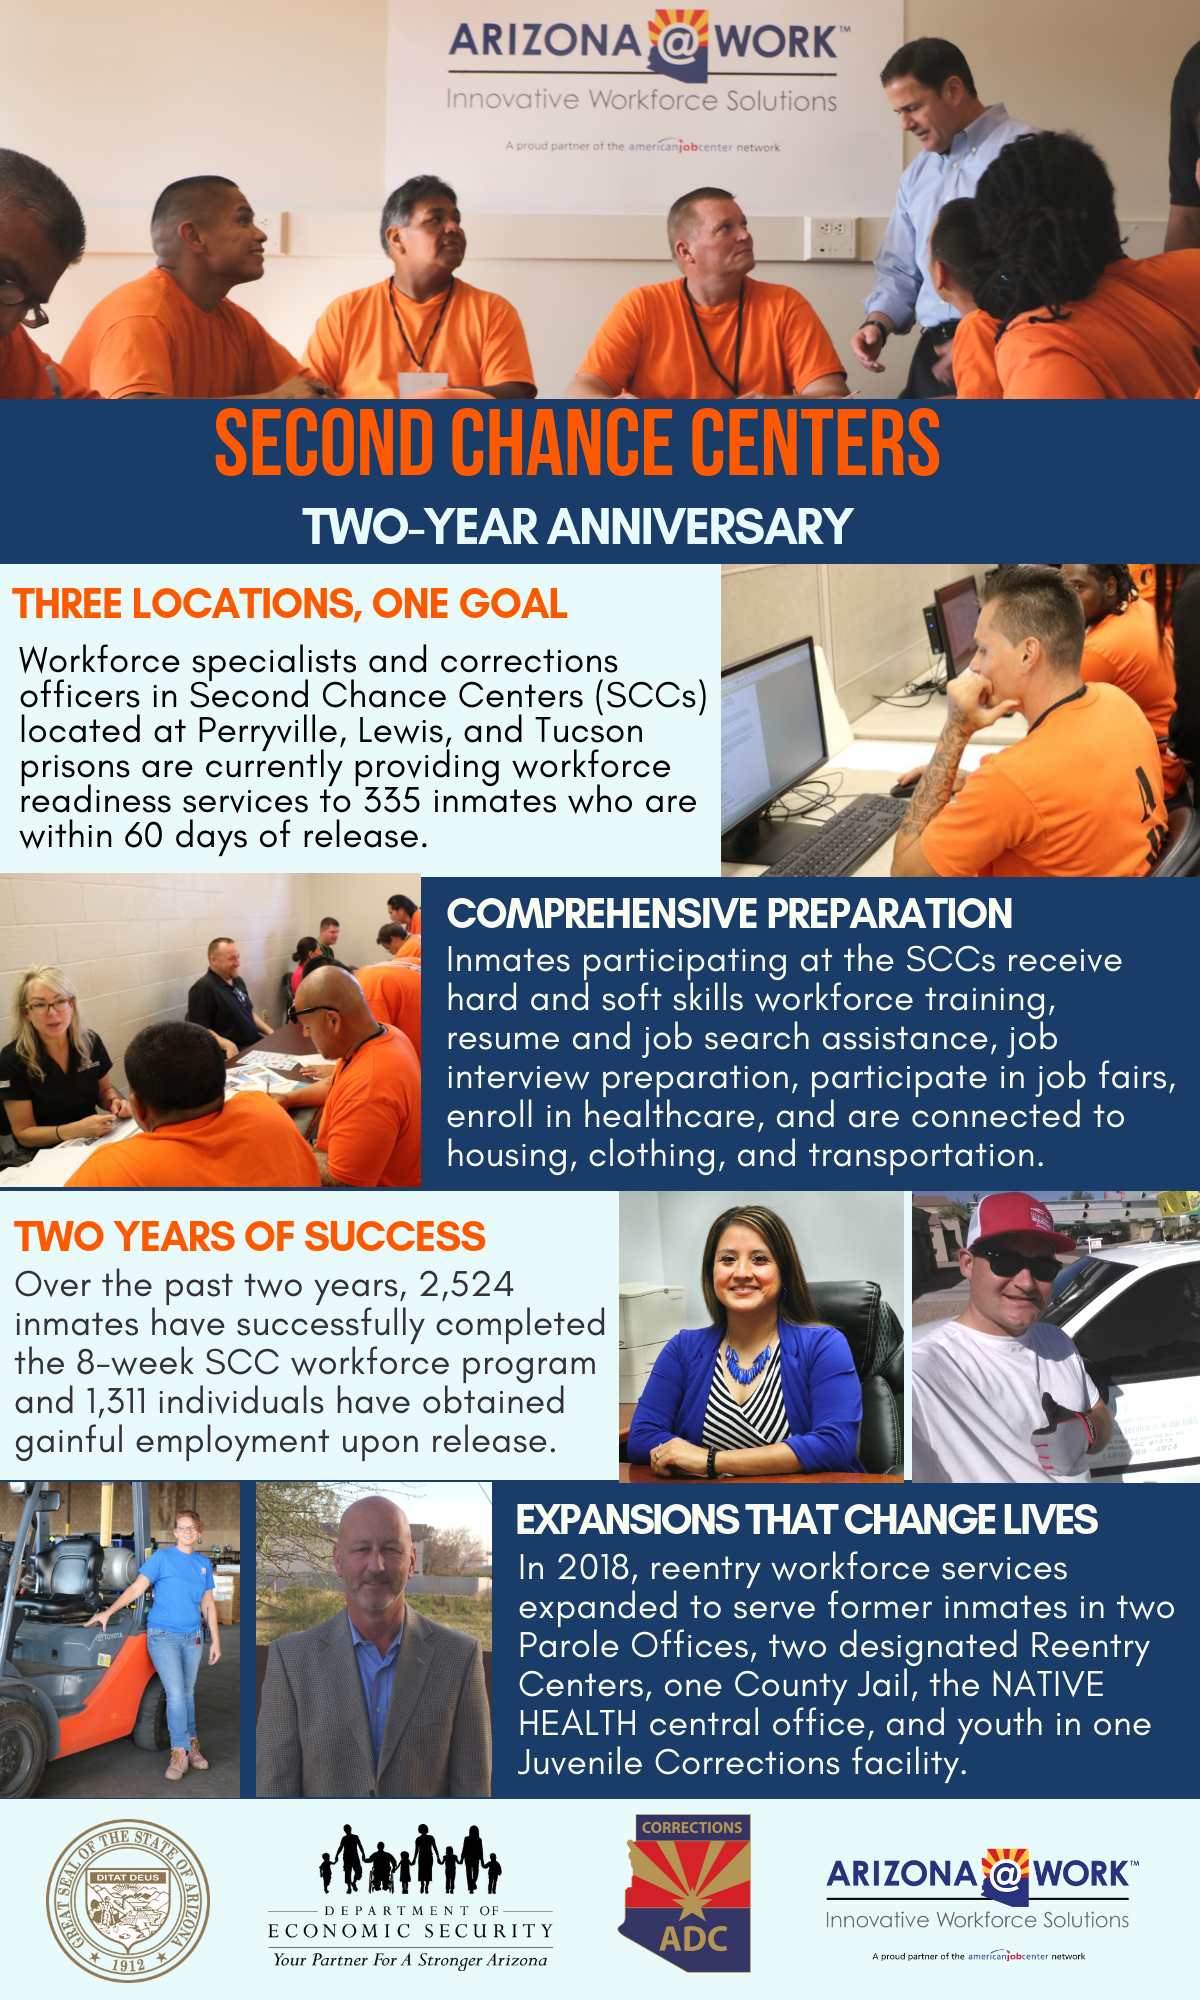 Information about Second Chance Centers